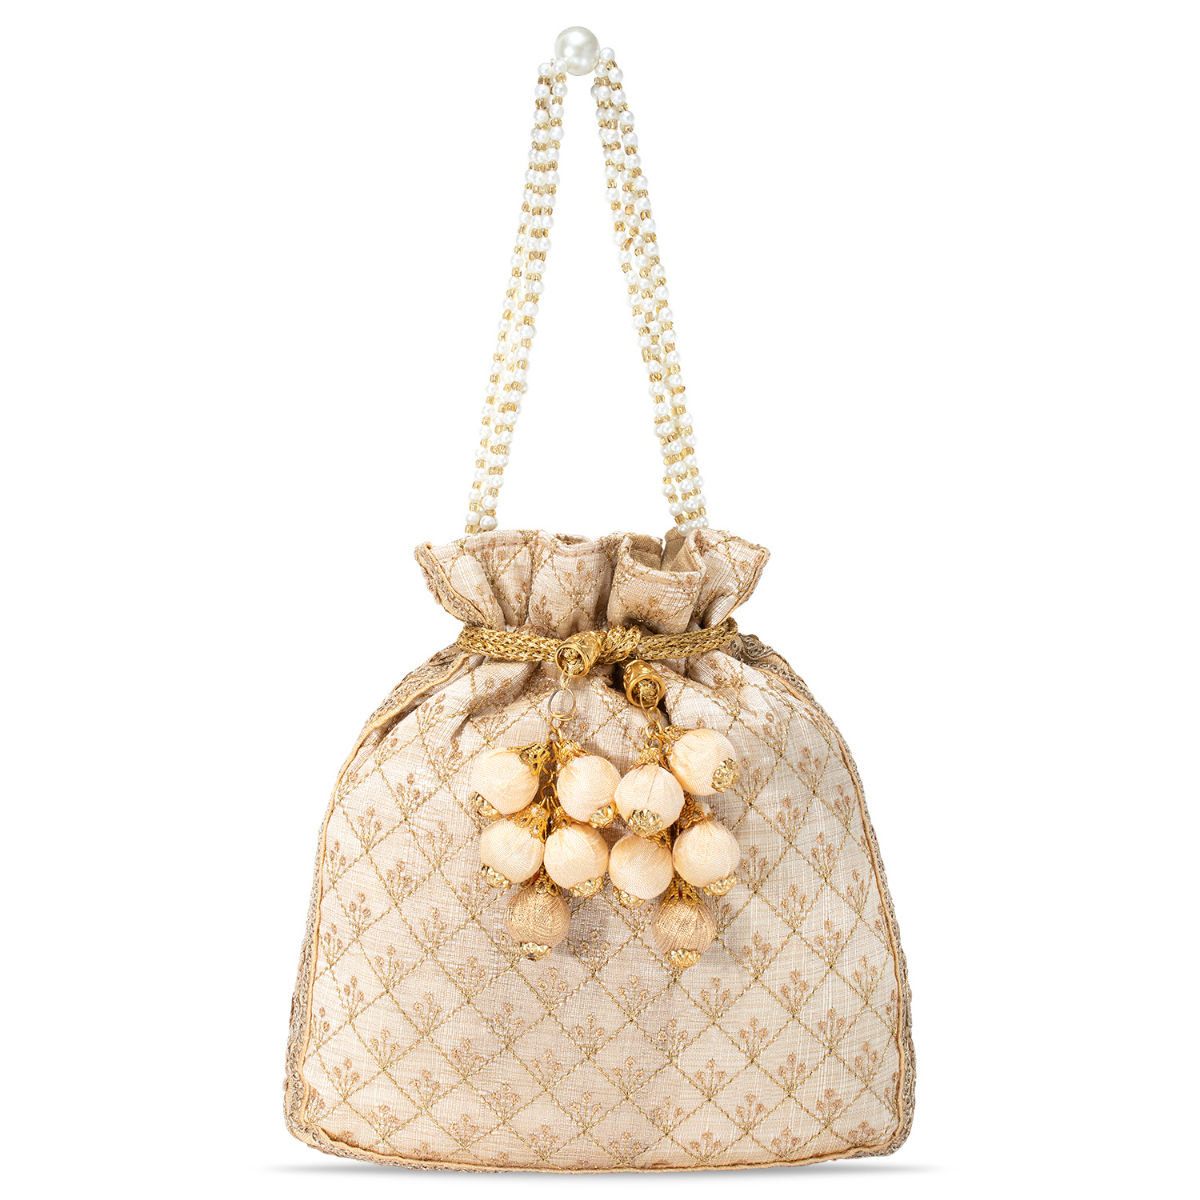 Buy Peora Potli Bags Evening Bags Ethnic Bride Purse with Drawstring Peach  - P78PCH online